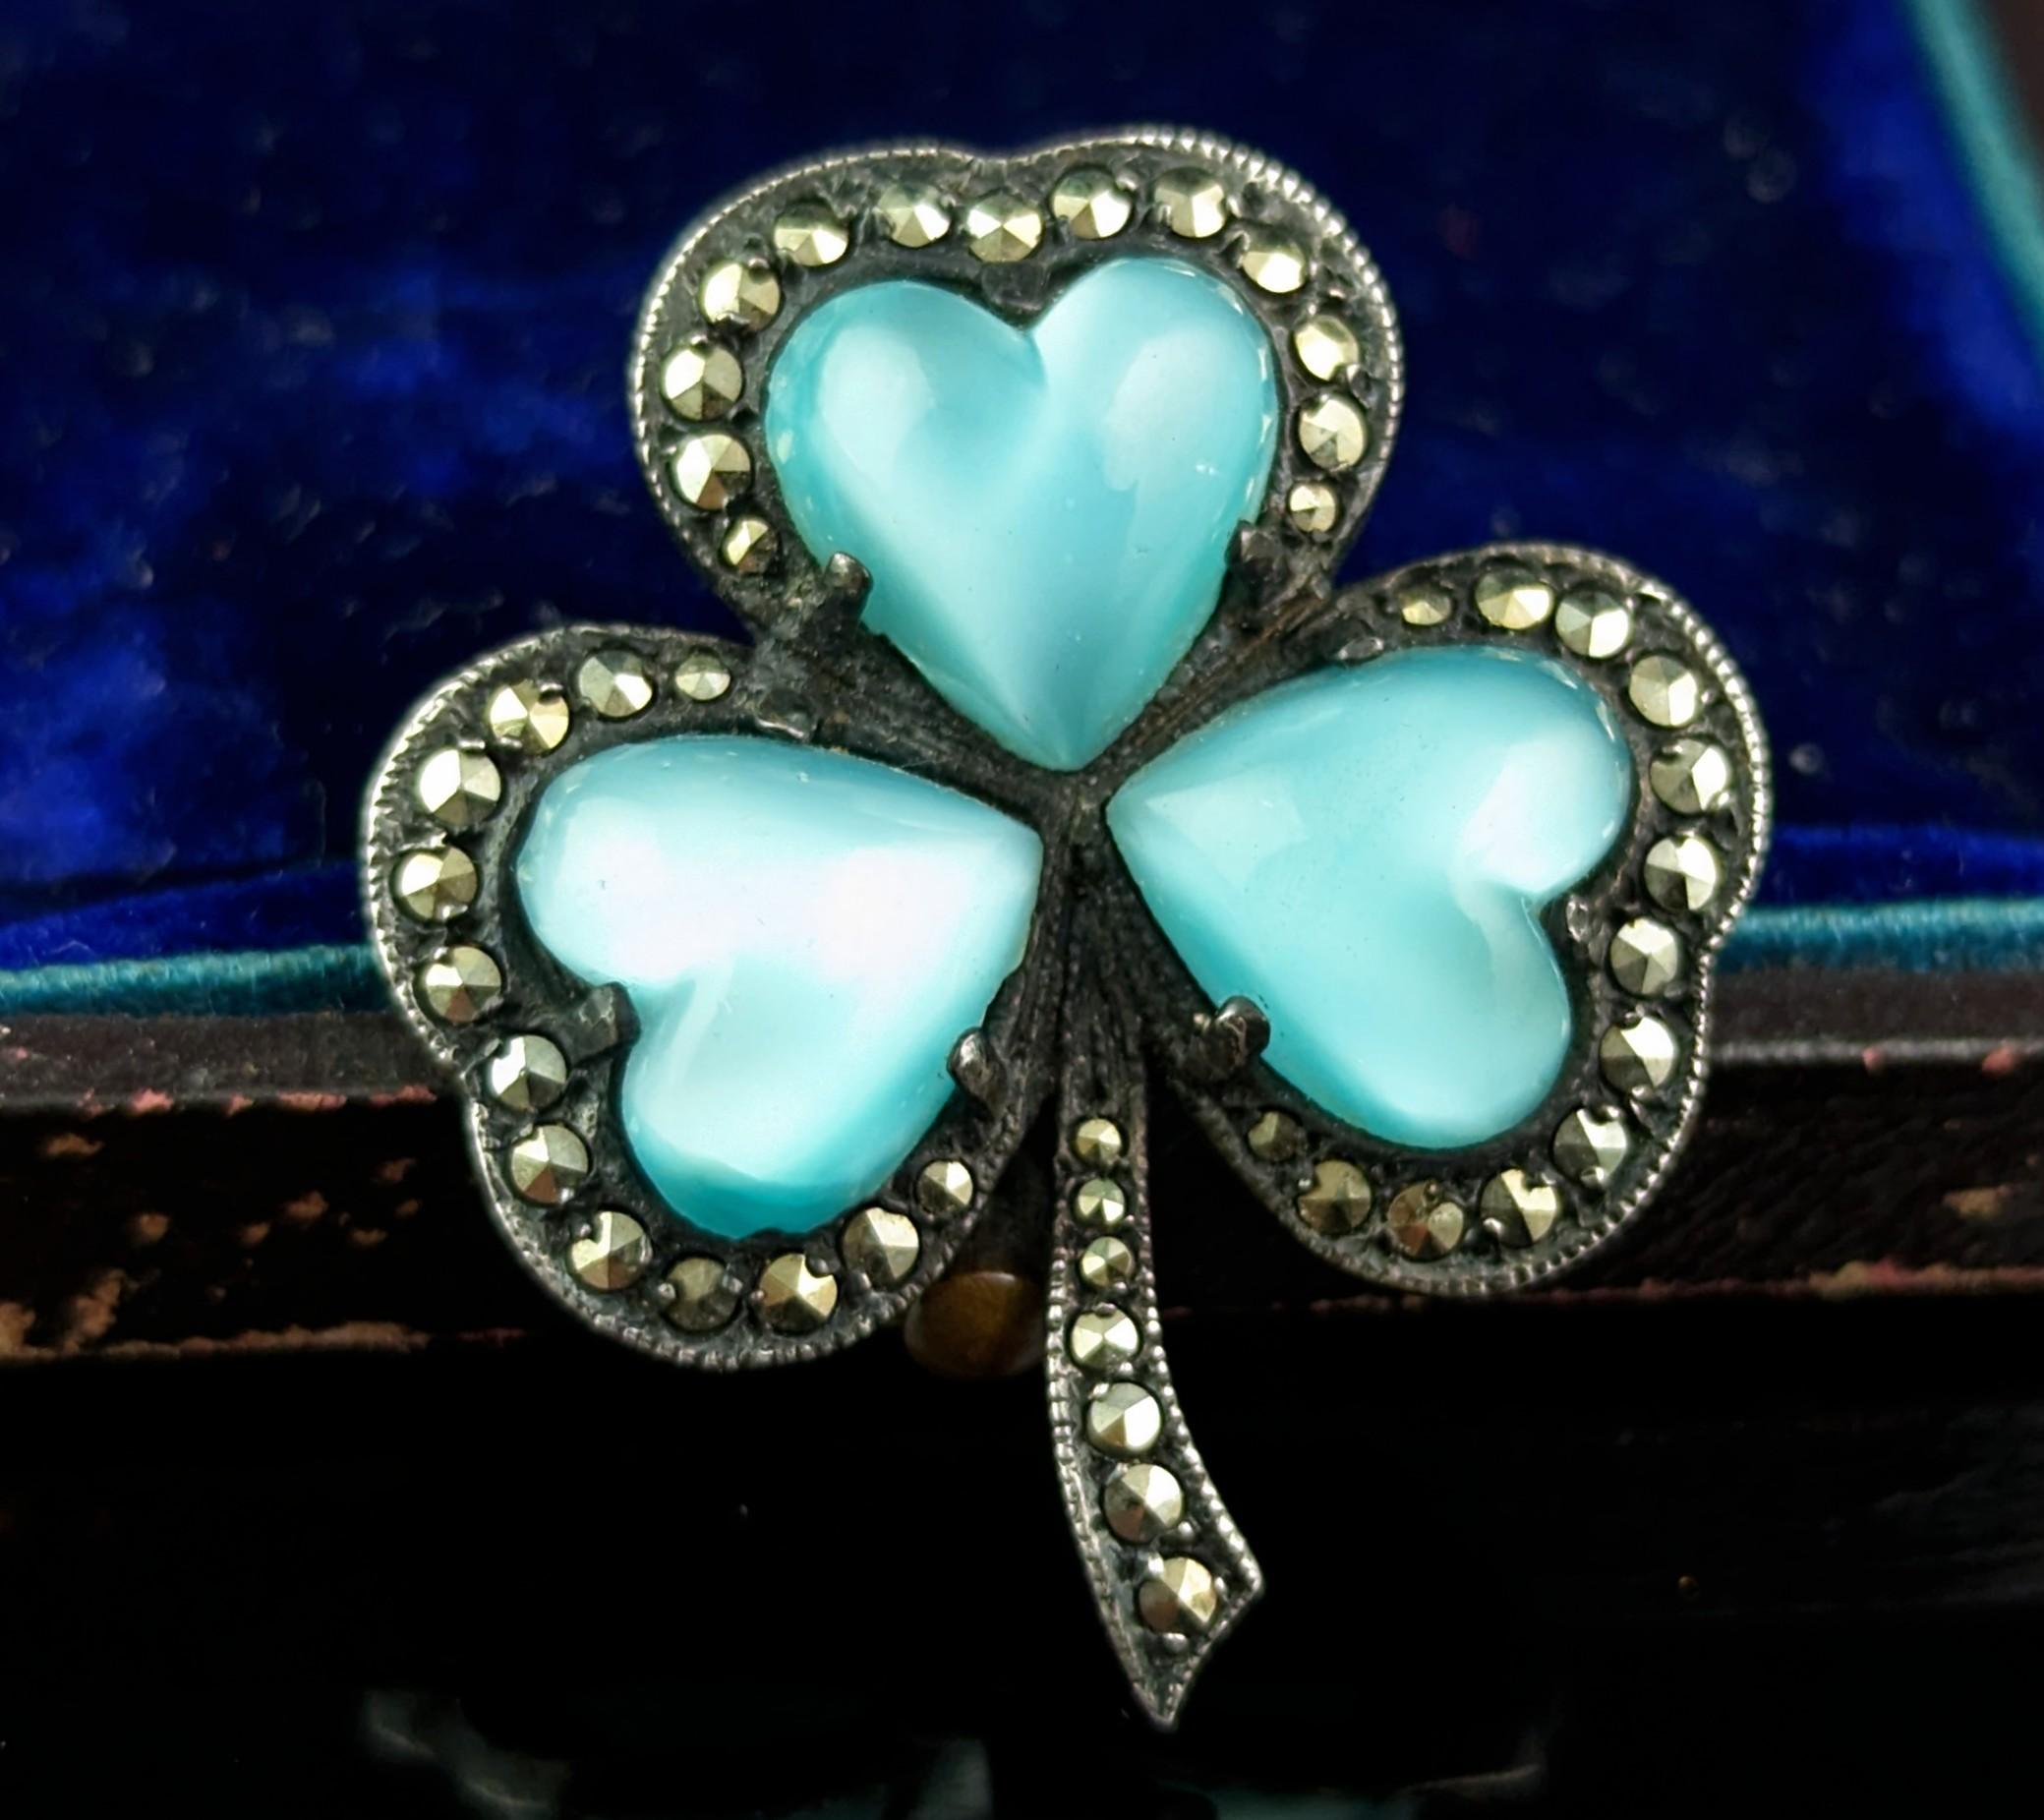 A gorgeous vintage Irish shamrock brooch.

This is such a beautiful piece with the lovely pearlised opaque blue paste cabs set into the front, these cabochons make up the leaves of the shamrock, they are chunky and smooth with a greeny blue